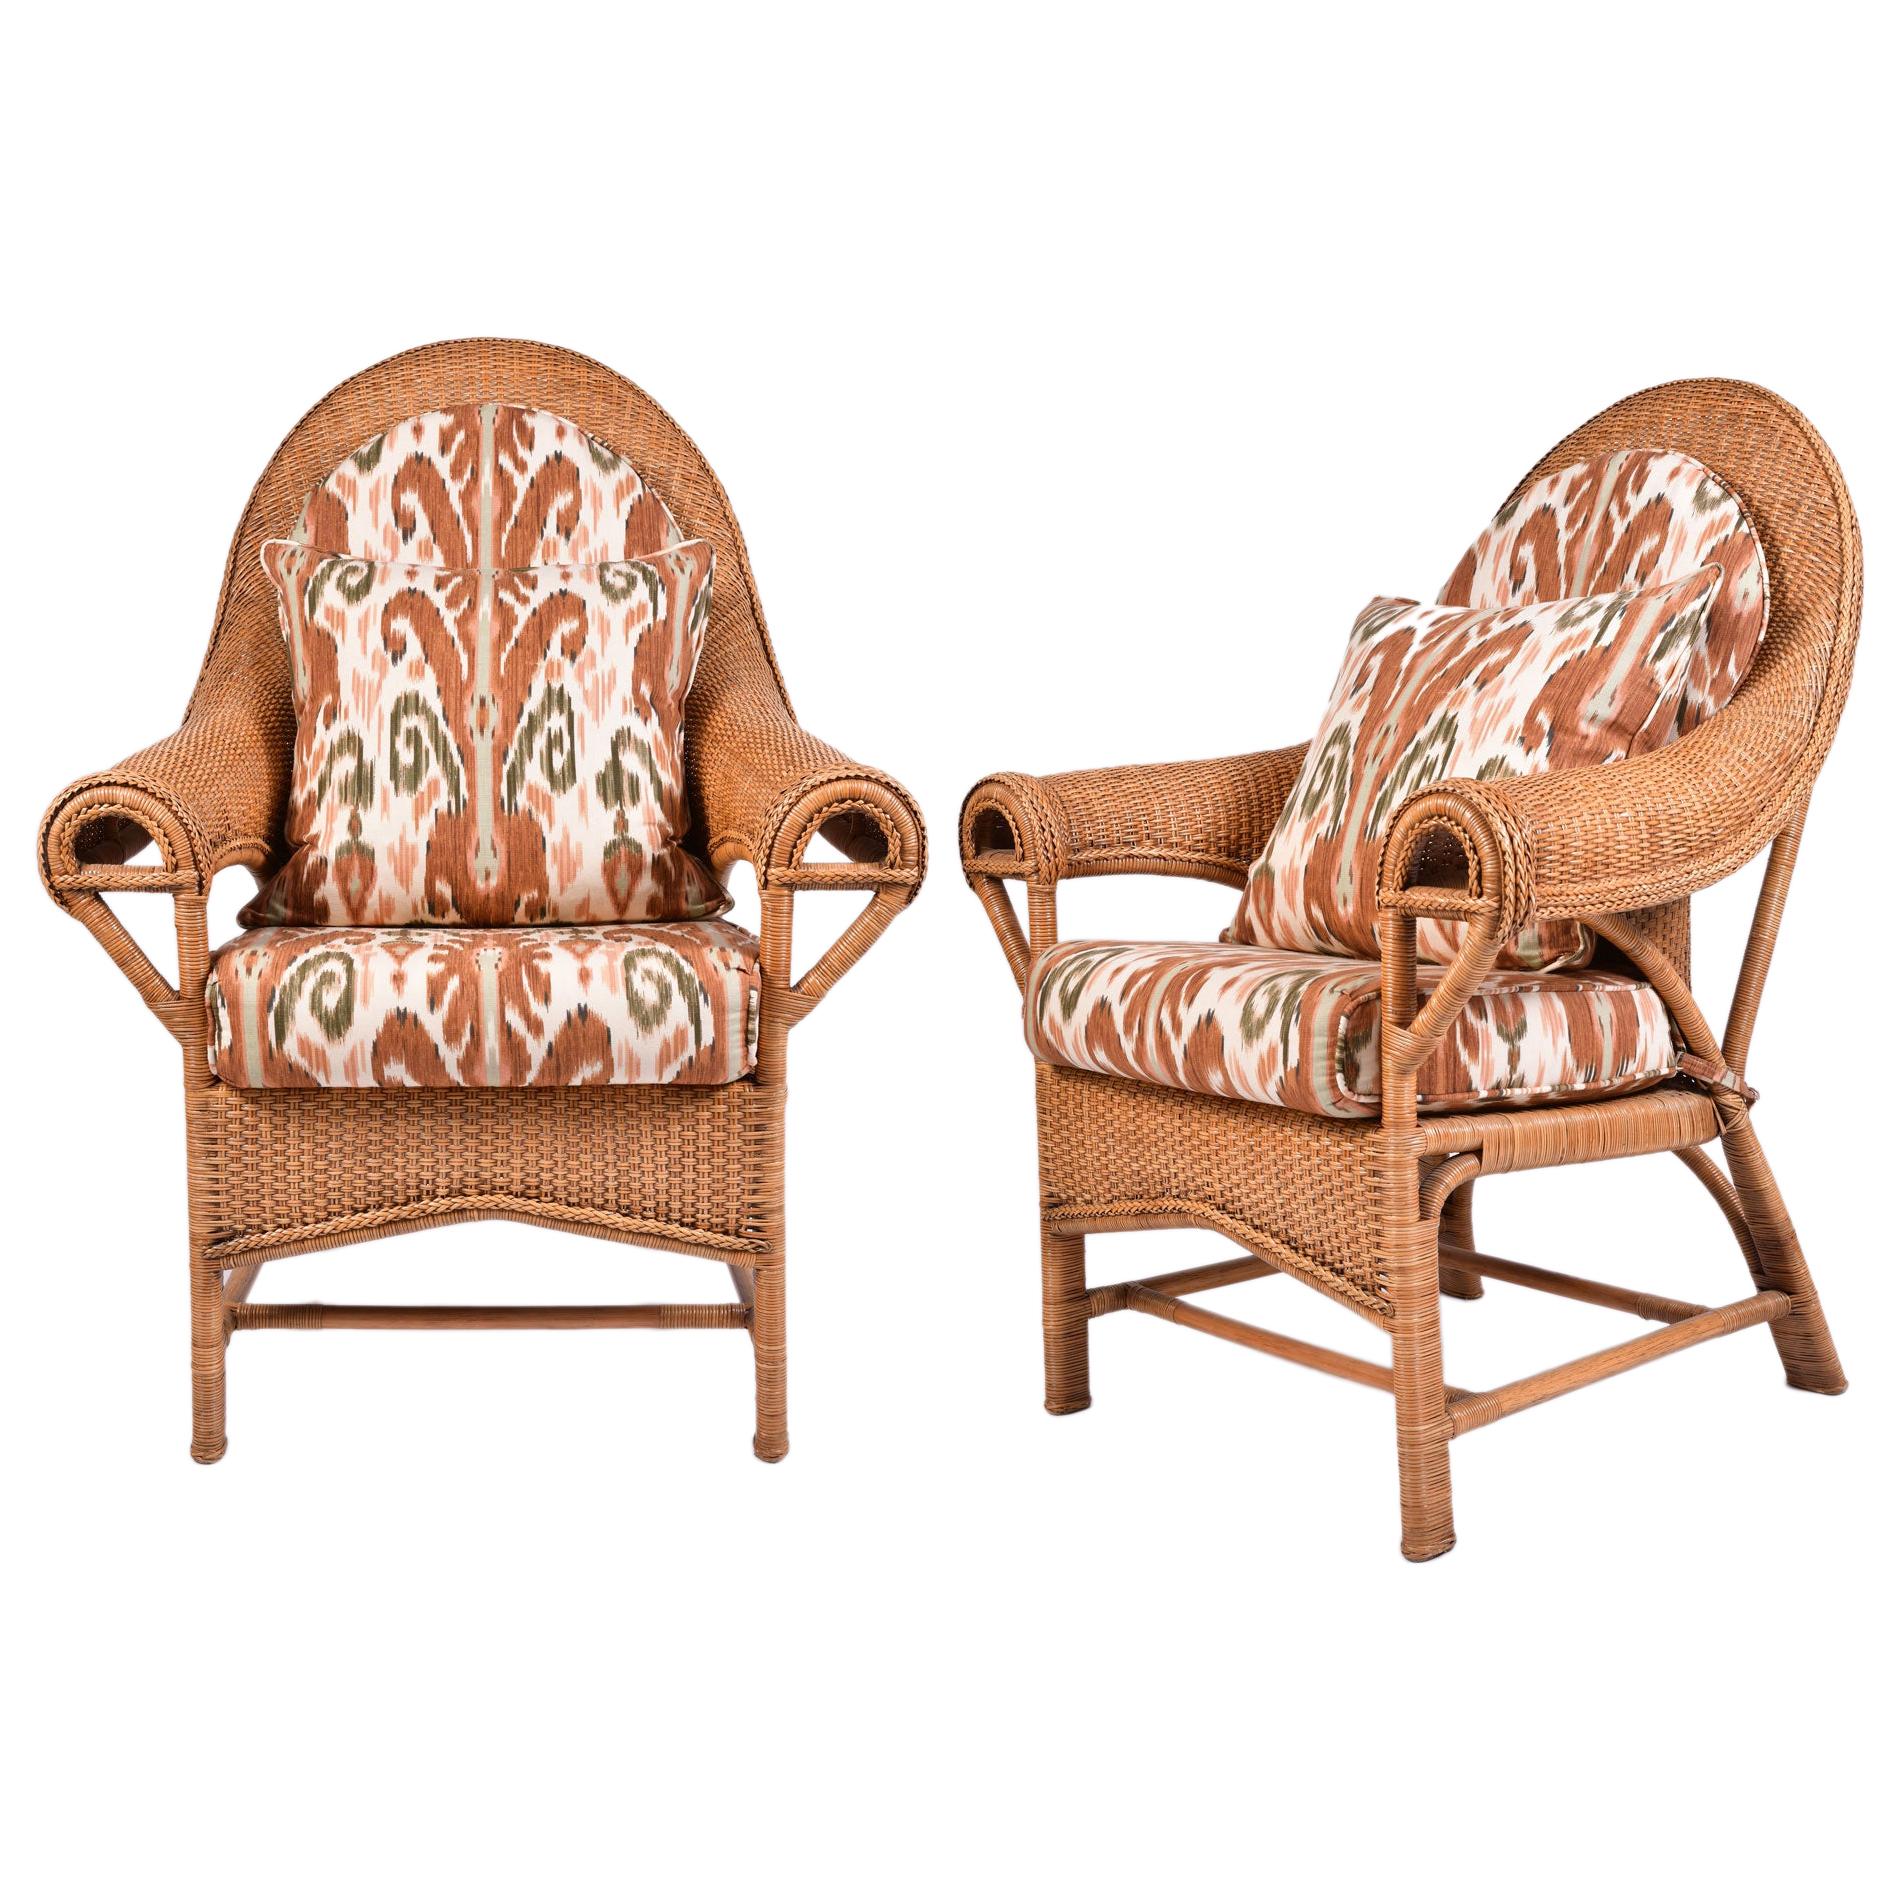 Pair of Imposing 1980s American Wicker Chairs